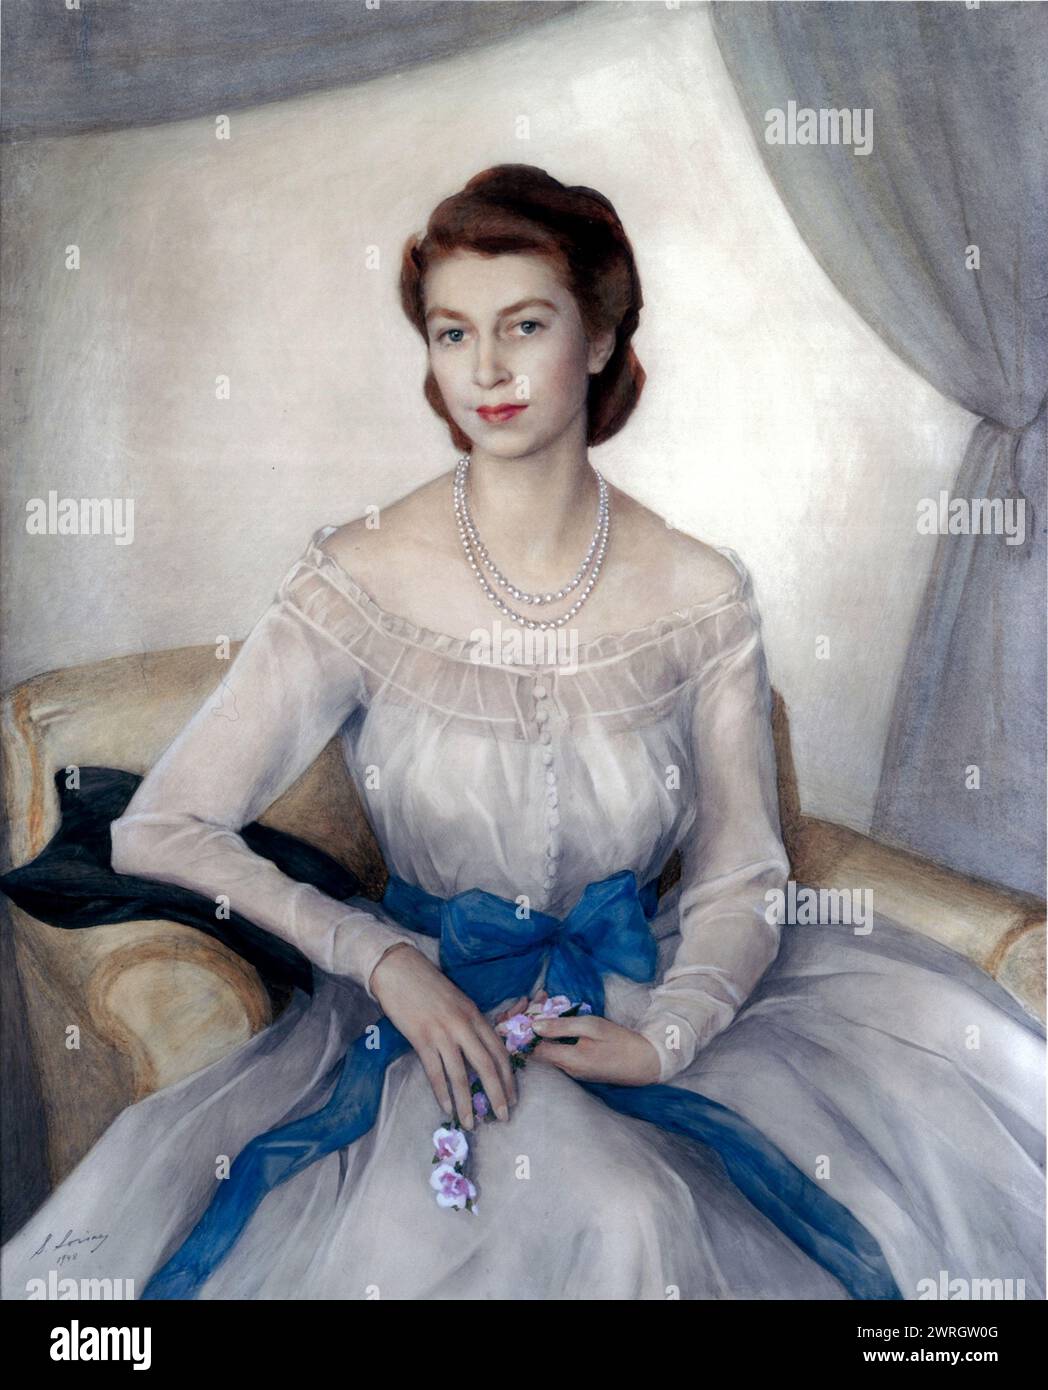 Portrait of the Princess Elizabeth, Duchess of Edinburgh, 1948. Found in the collection of Clarence House, London. Stock Photo